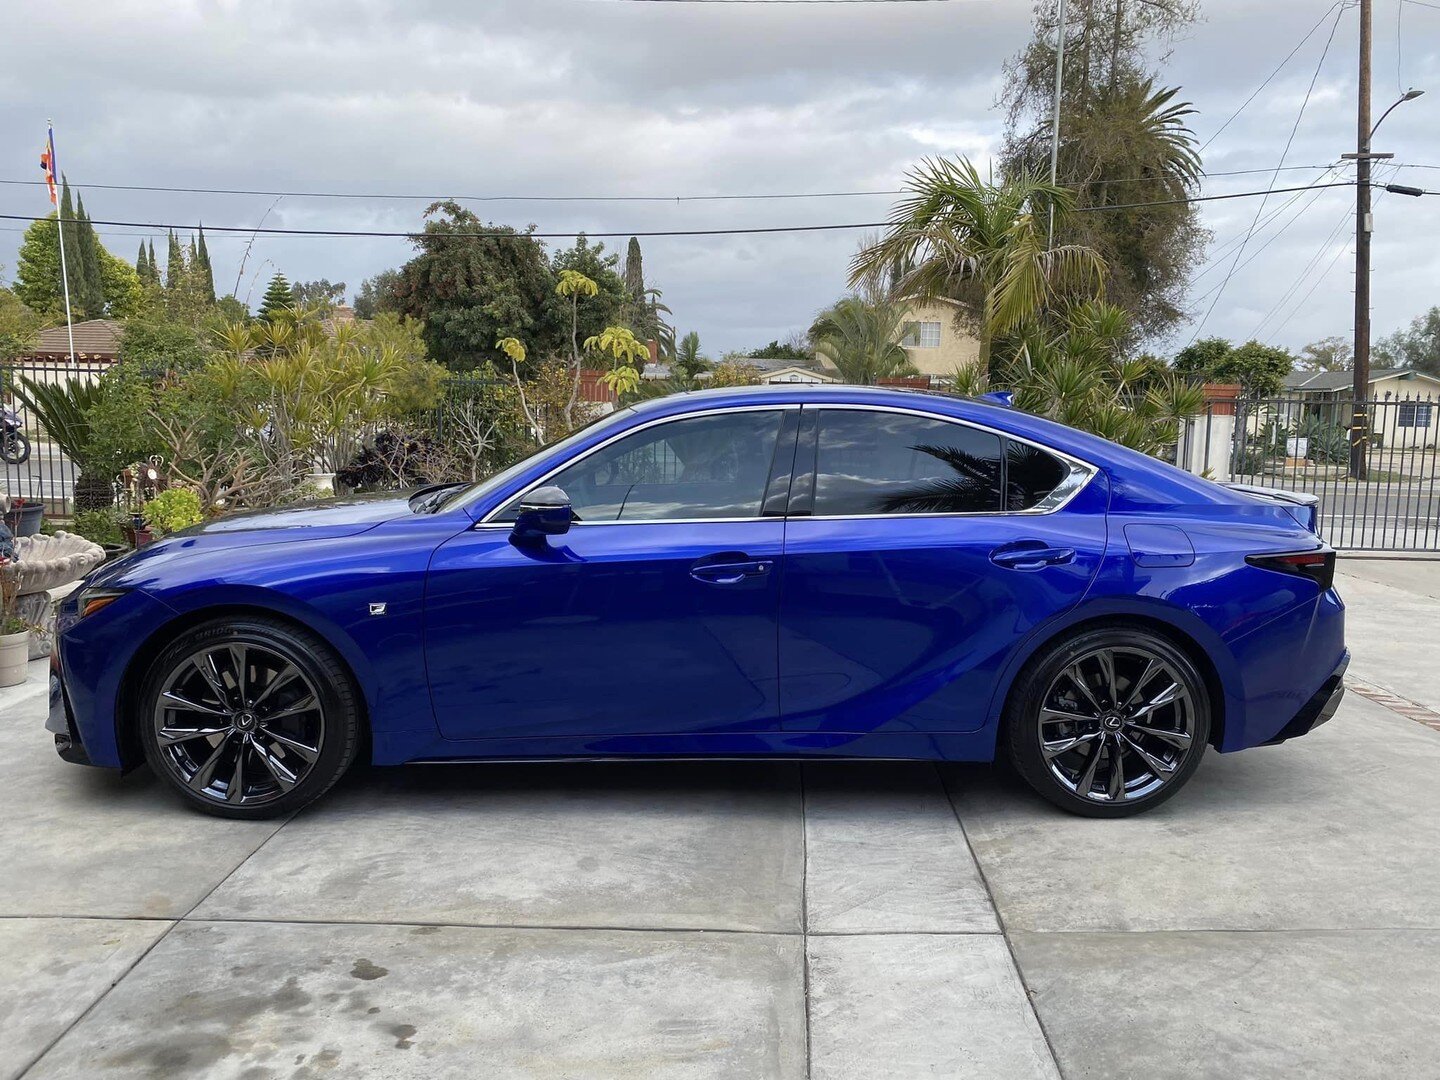 Client 23 Lexus IS350 Windshield 70 percent / Front 70 Percent / Rear 70 percent / Backglass 70 percent ceramic tint

🏎 Aftermarket Performance Parts
💰Financing available
📧 info@kenjigarage.com
📲 714-417-2698
🌎 Ship World Wide
💻 www.kenjigarage